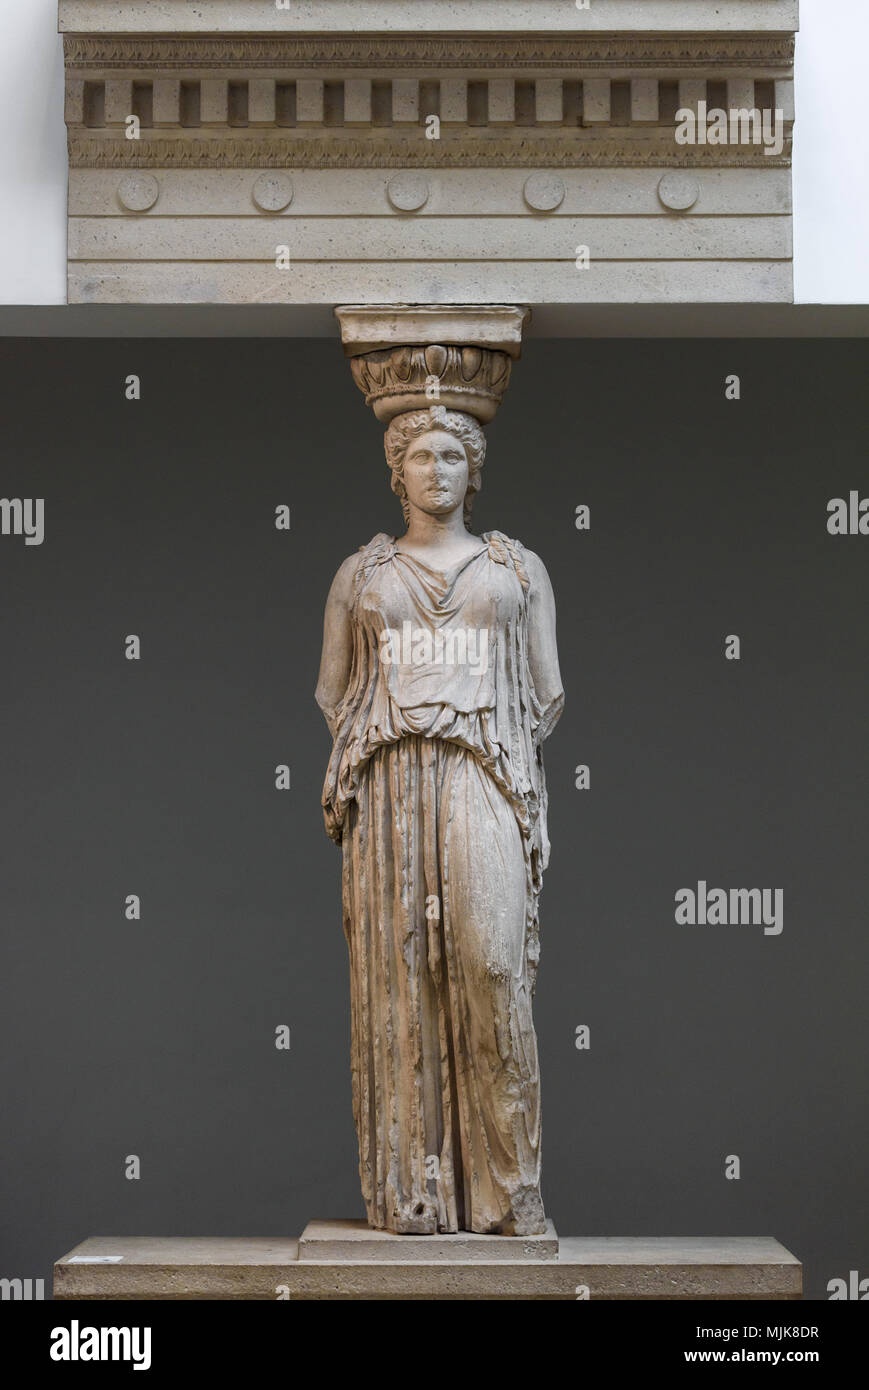 London. England. British Museum, Caryatid from the Erechtheum (Erechtheion) temple on the Acropolis in Athens, ca. 421-406 BC. Stock Photo